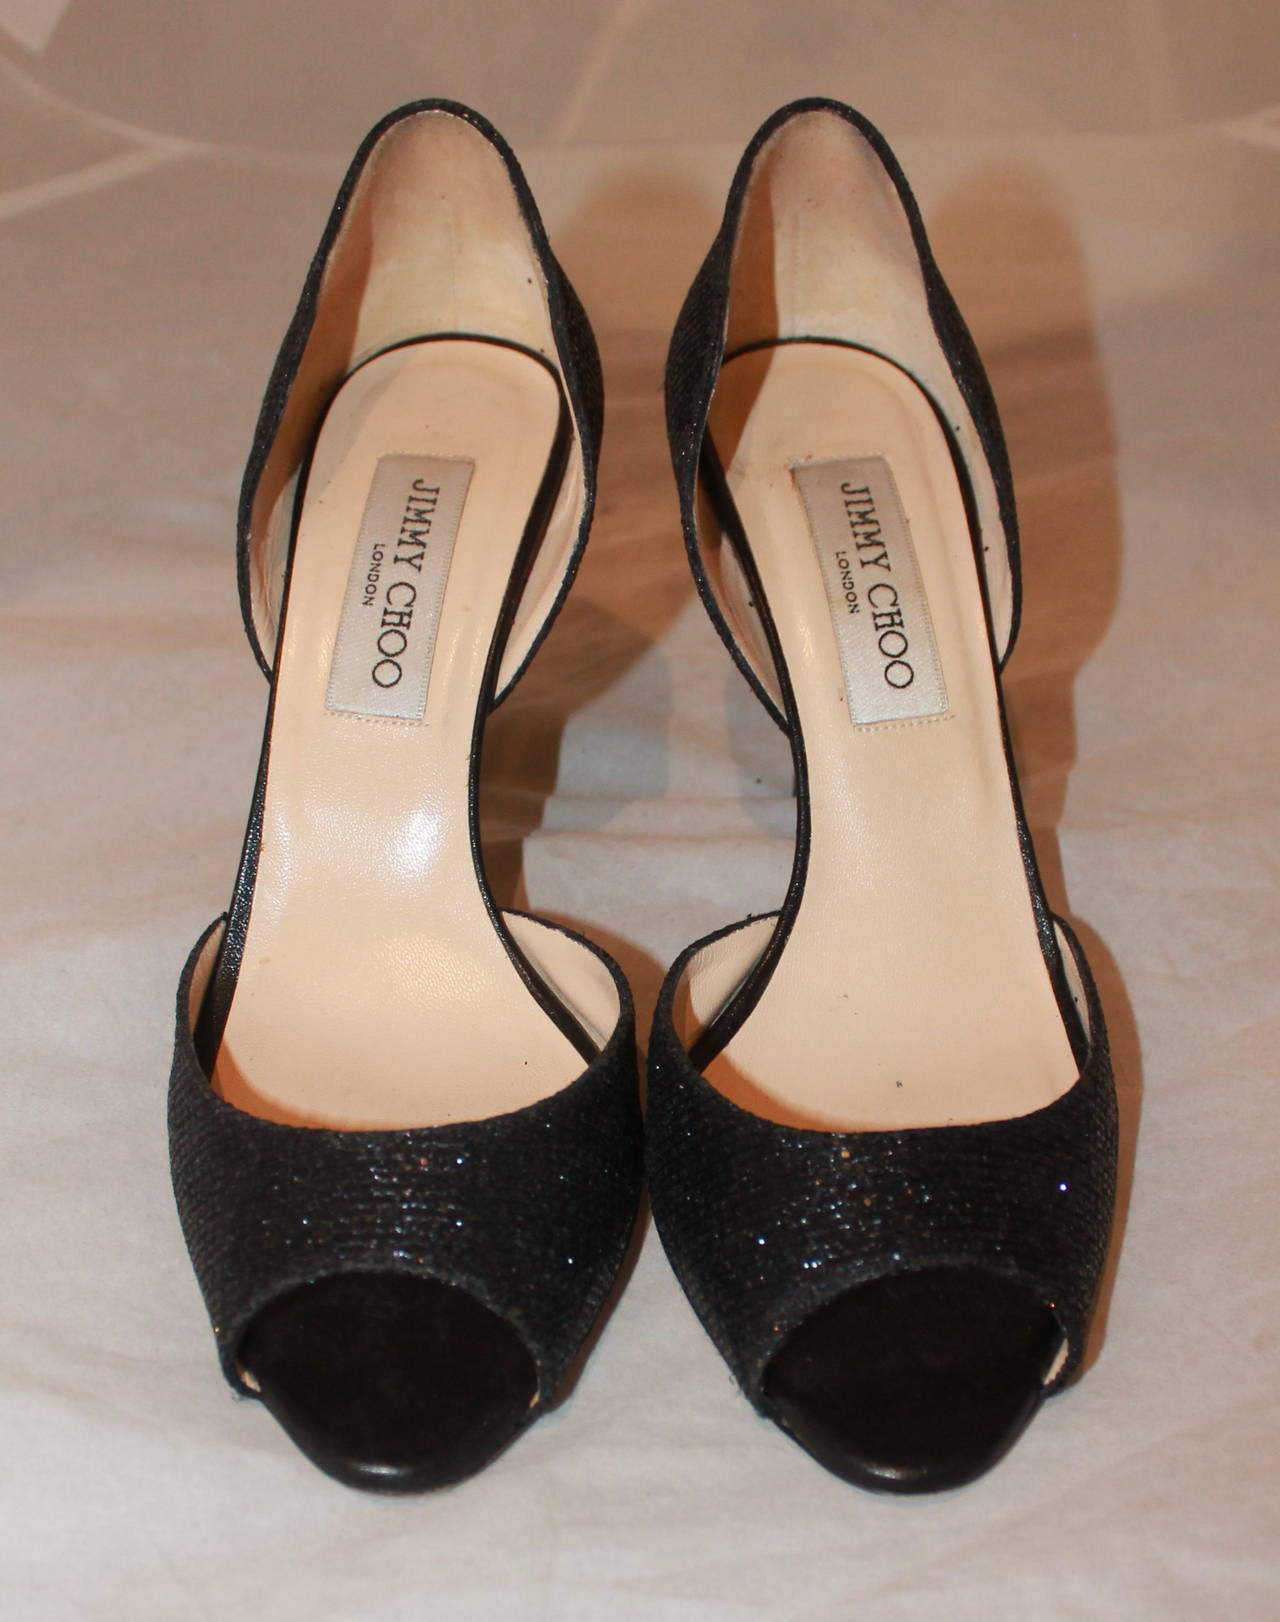 Jimmy Choo Black Sparkle Heels - 37.5. These shoes are in excellent condition with minor wear on the bottom.